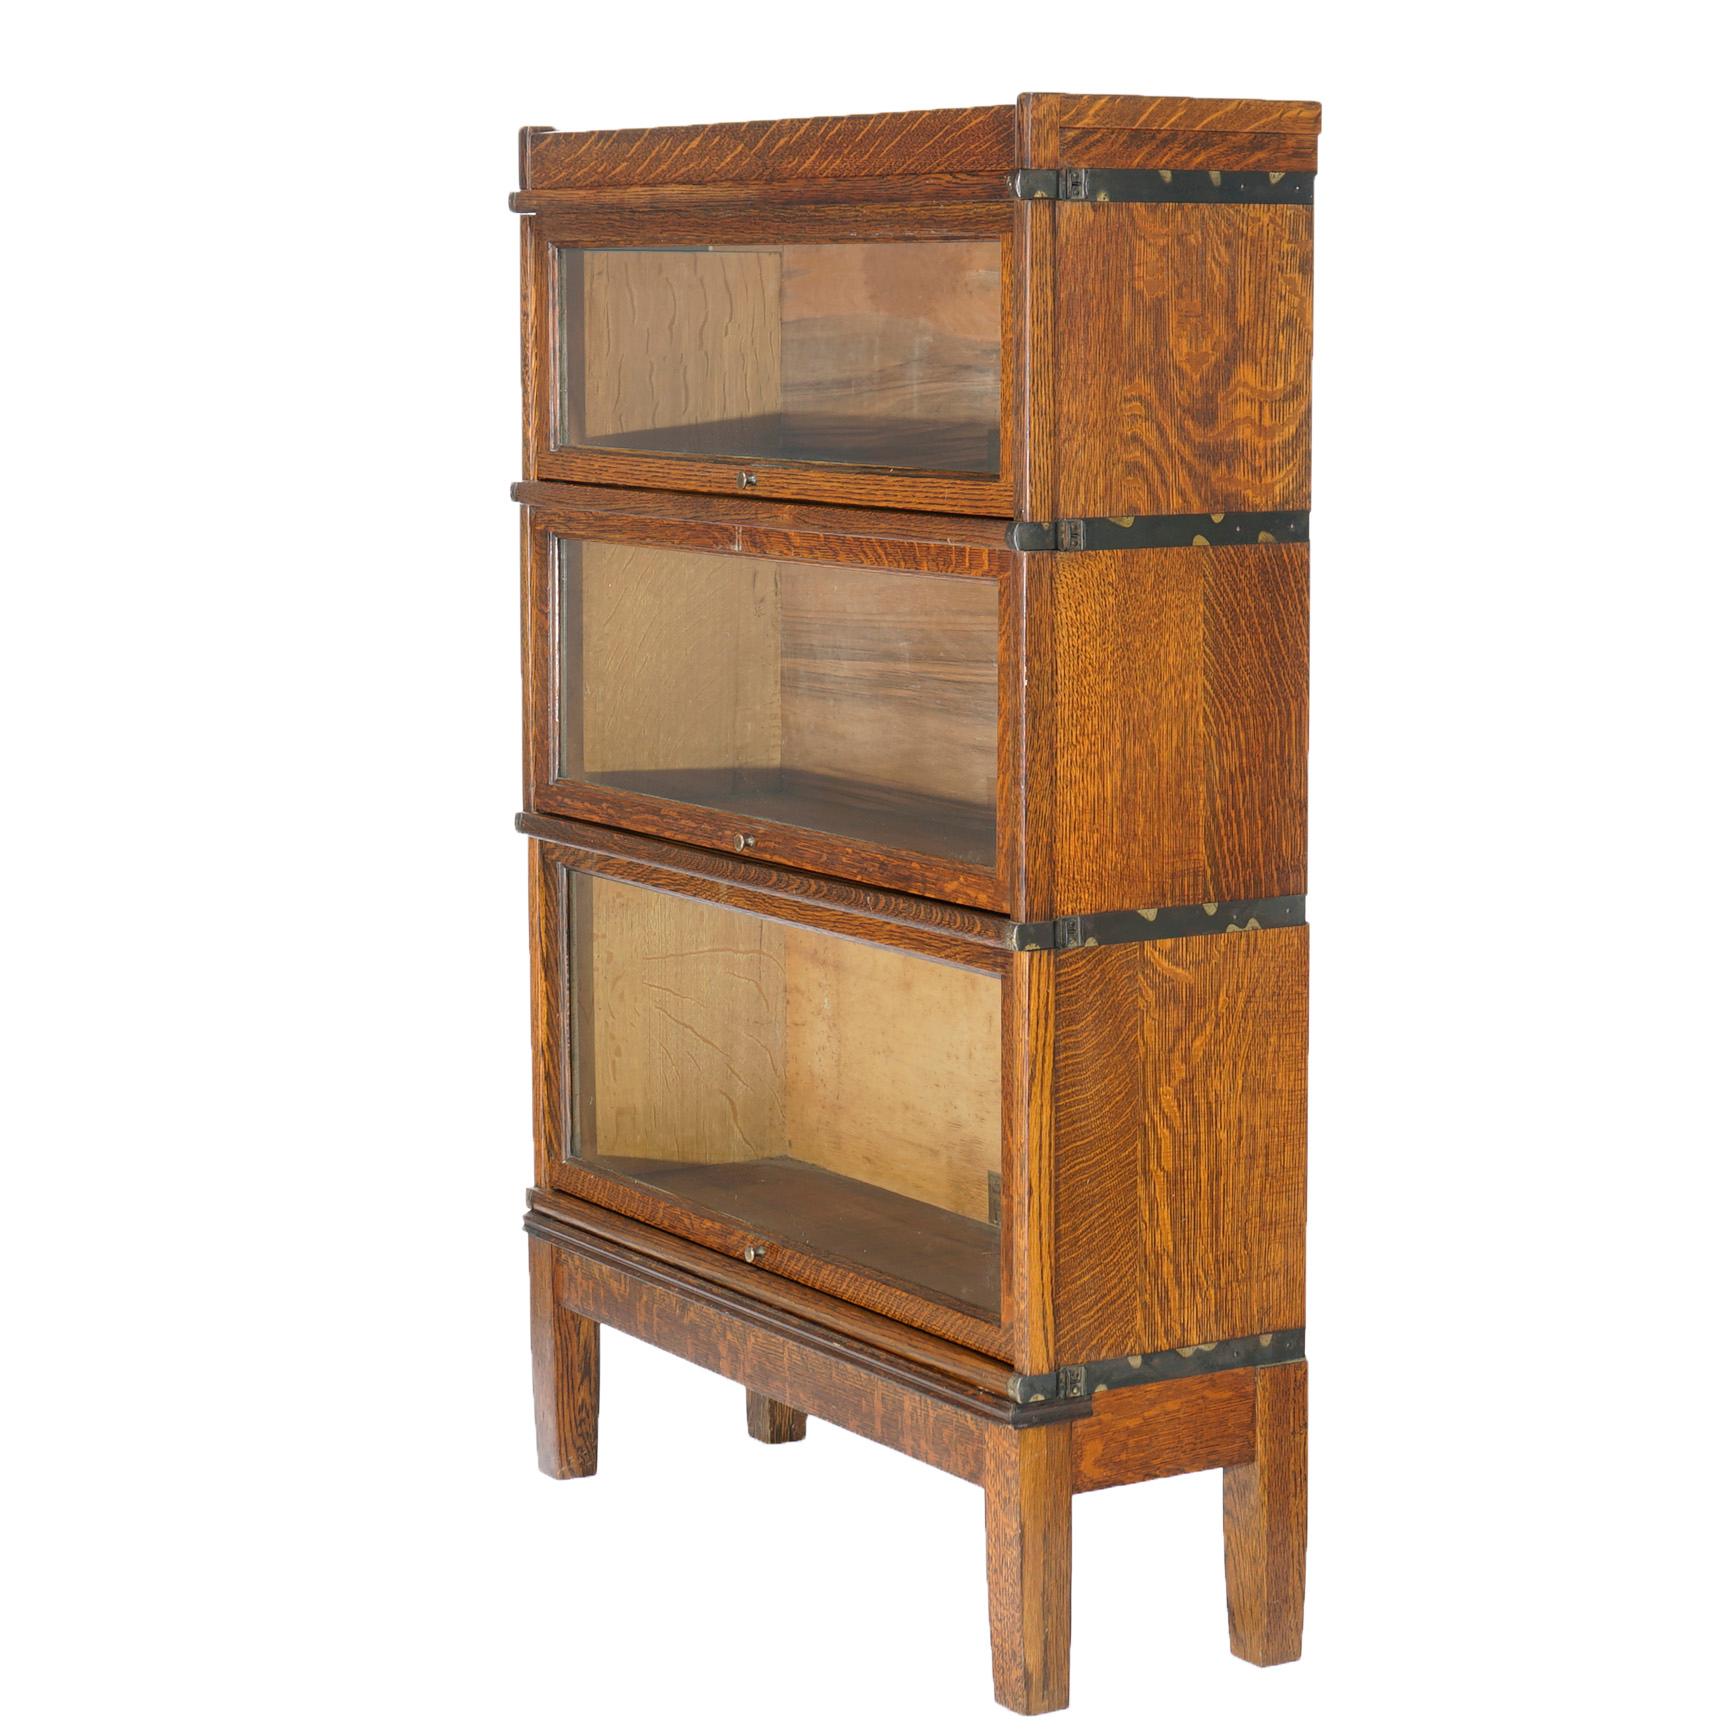 An antique Arts & Crafts Mission barrister bookcase by Globe Wernicke offers quarter sawn oak construction with three stacks each having pull-out glass doors over base with square and straight legs, maker label as photographed, c1910

Measures-